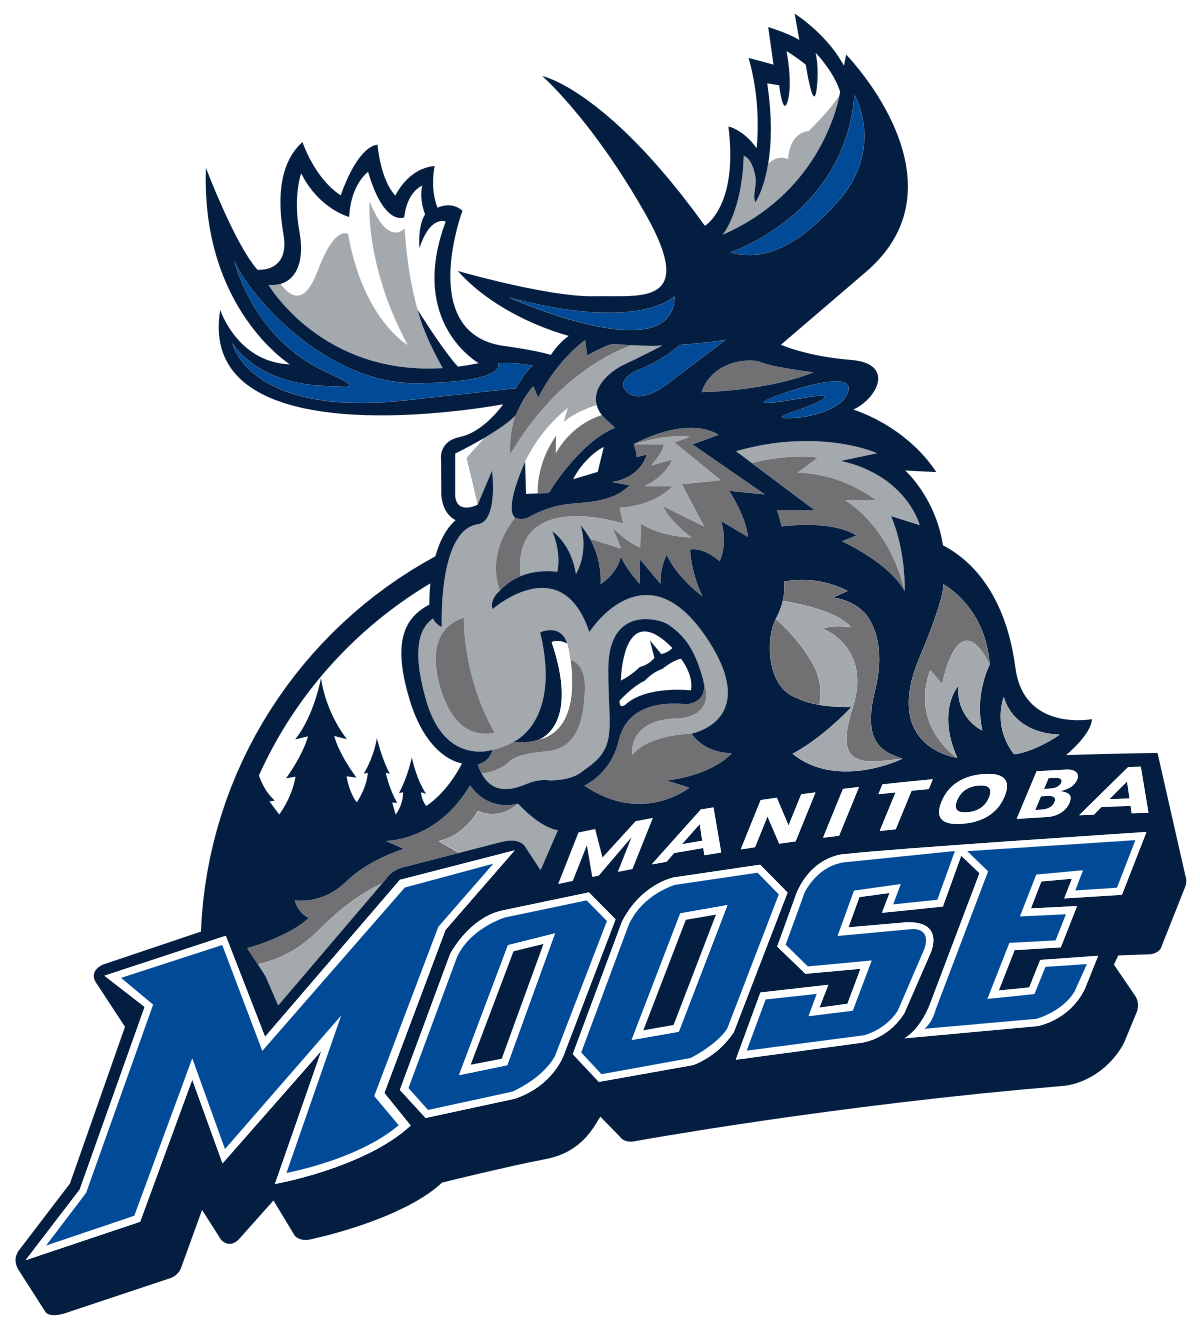 Manitoba Moose eliminated in 2 straight by Texas Stars